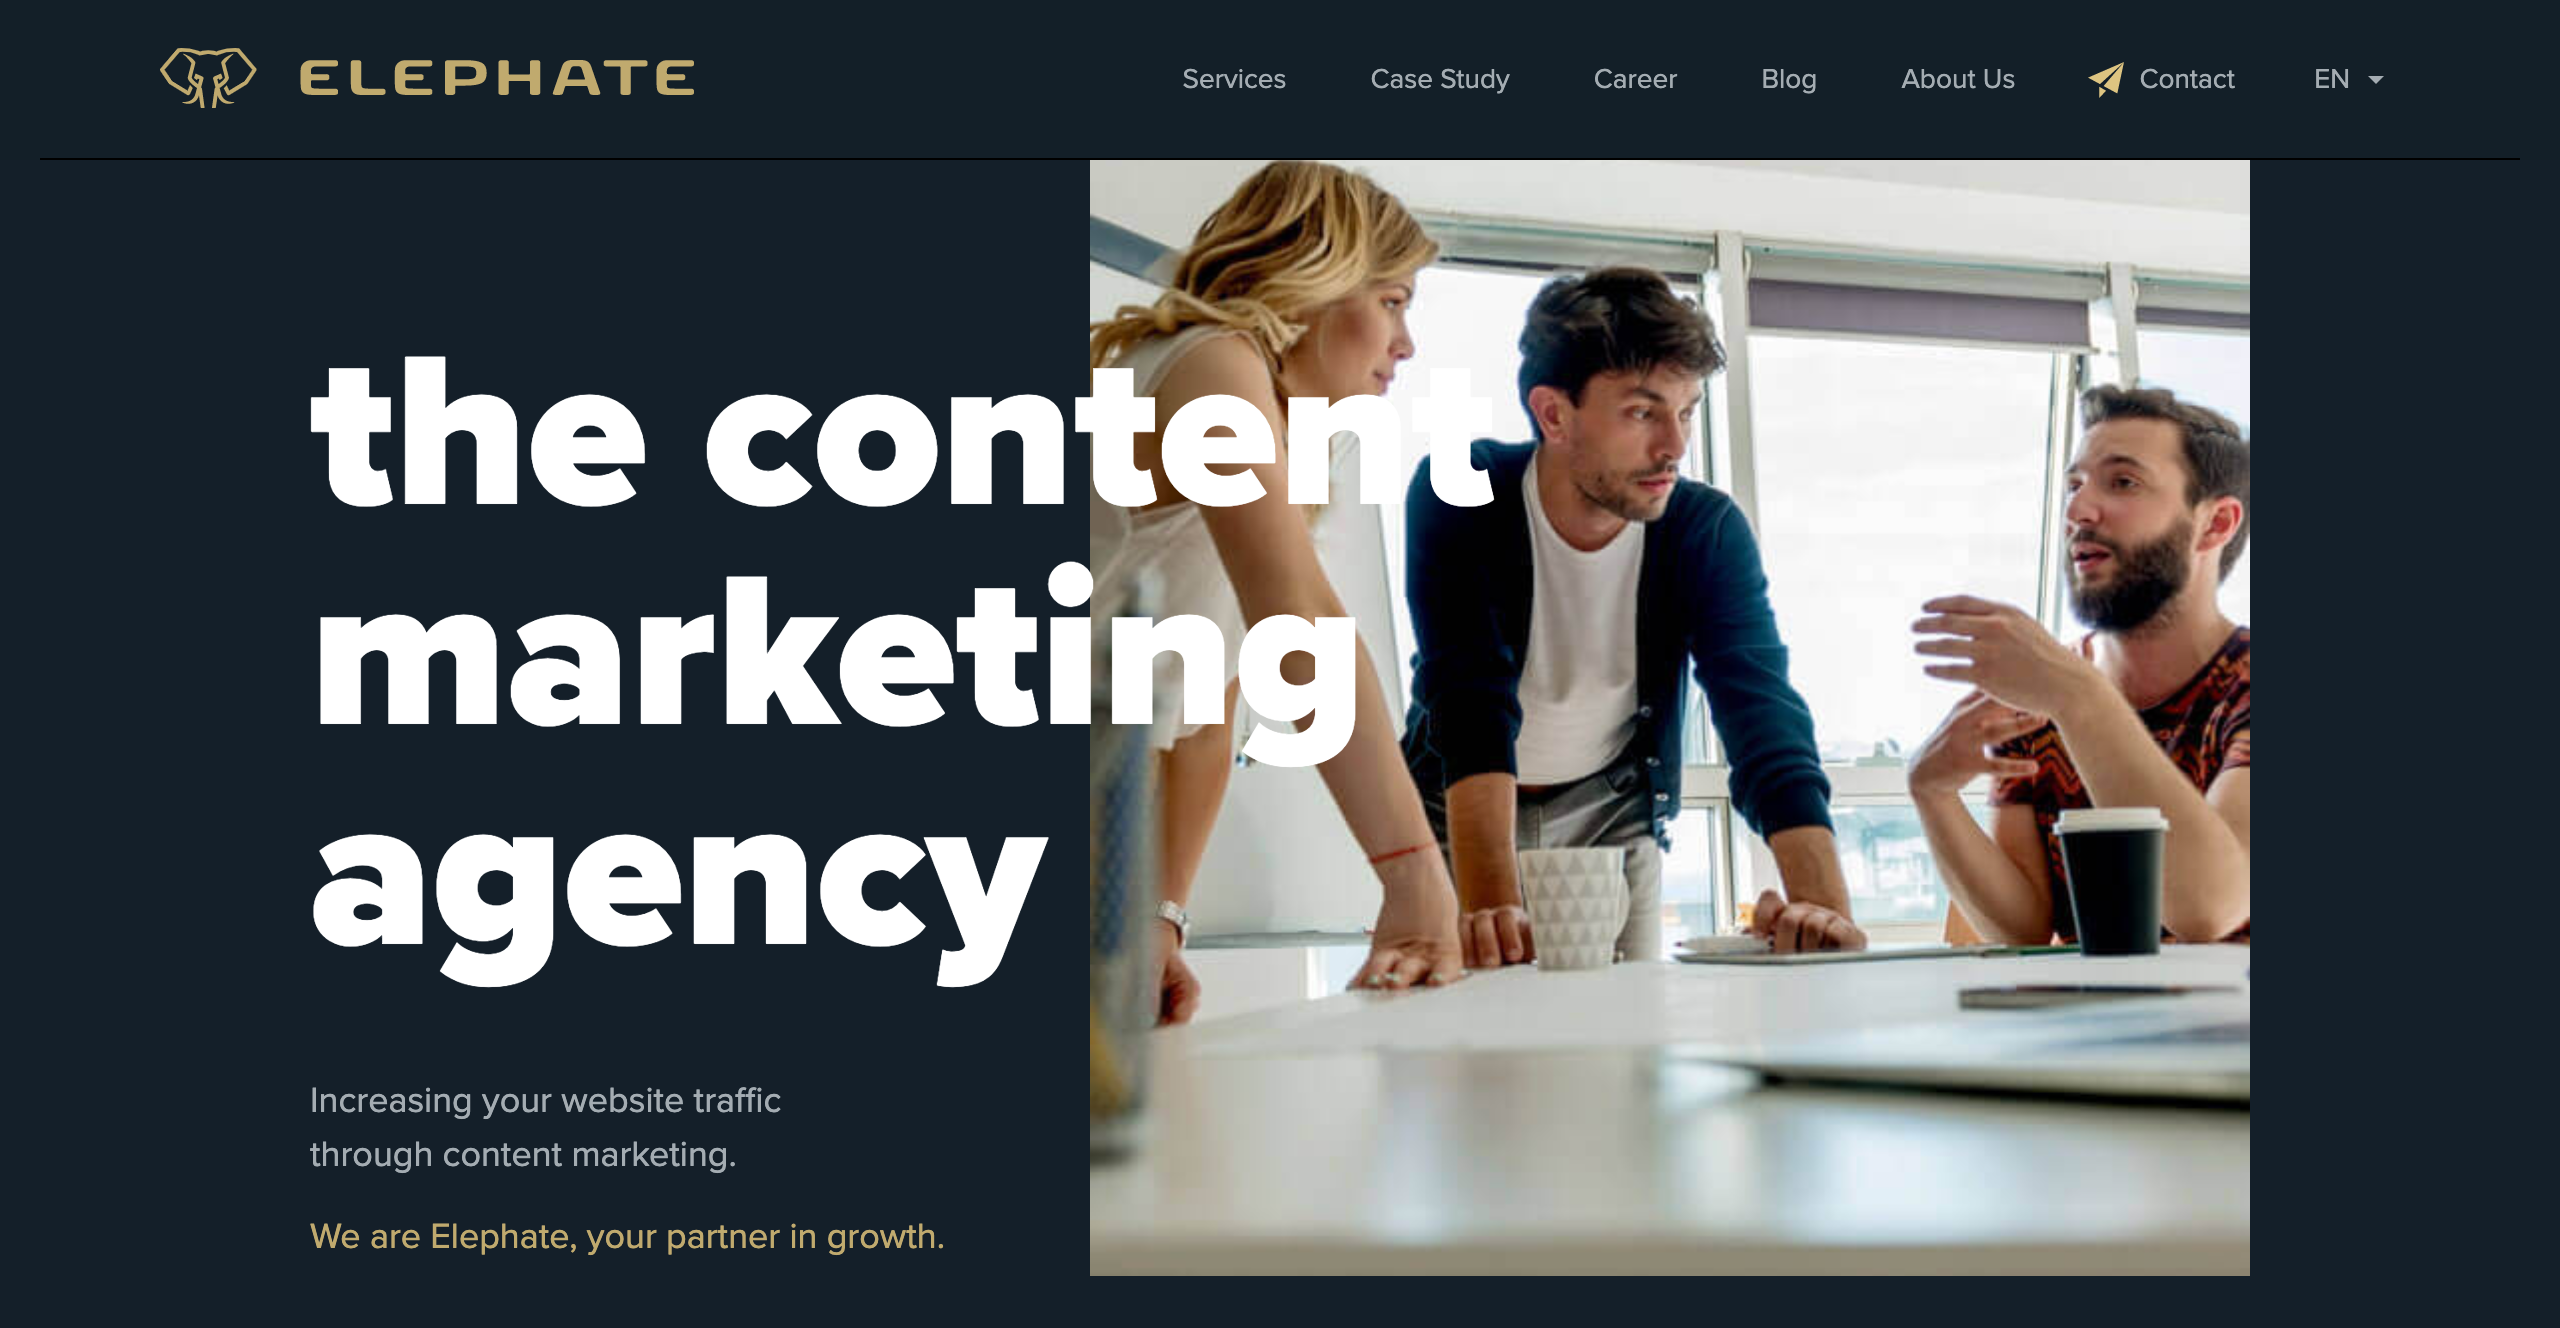 Elephate content marketing agency